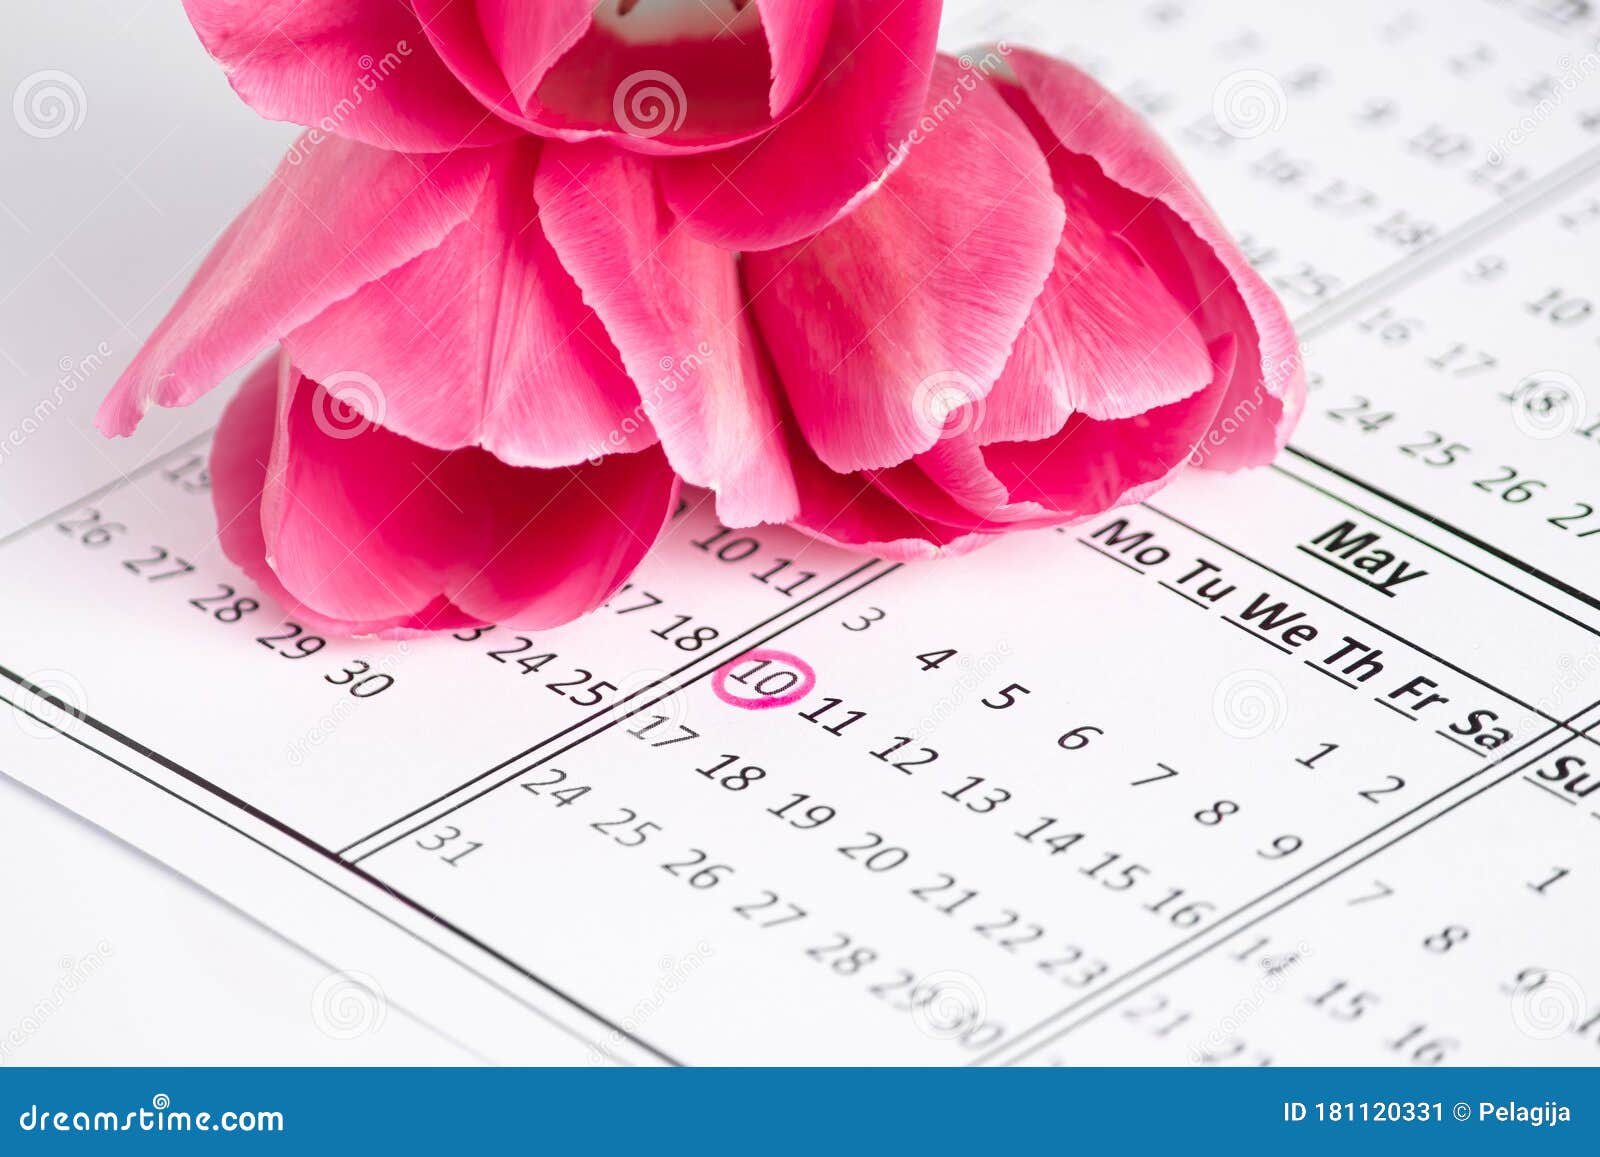 Mothers Day Calendar With A Marked Date And Pink Flowers A Reminder